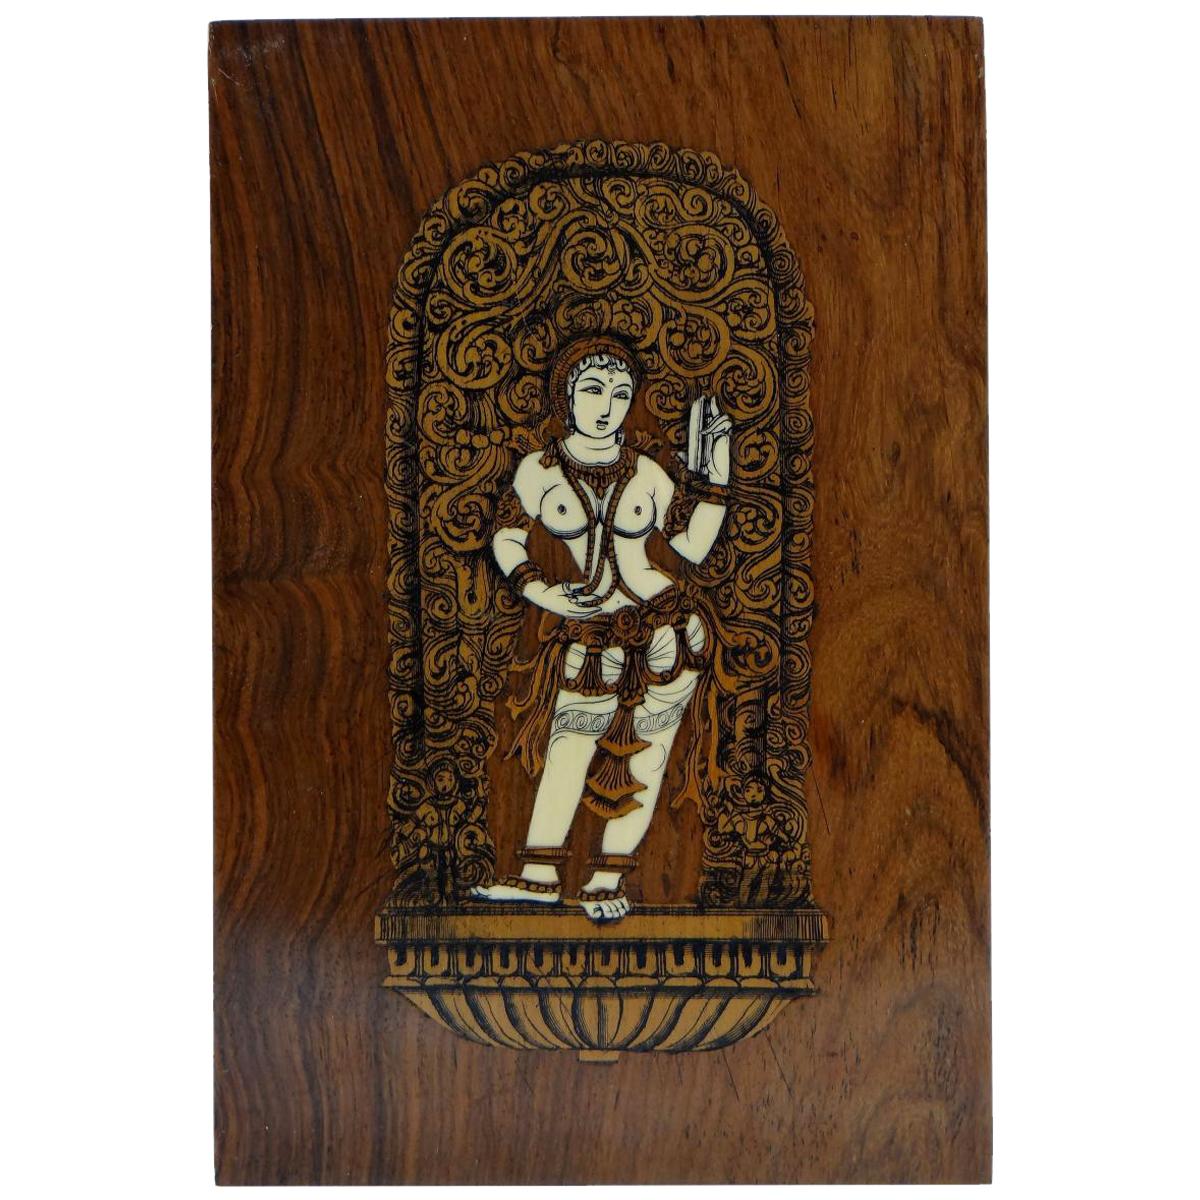 Inlaid Panel Decor of an Indian Goddess, Anglo-Indian Work 1920s-1930s For Sale